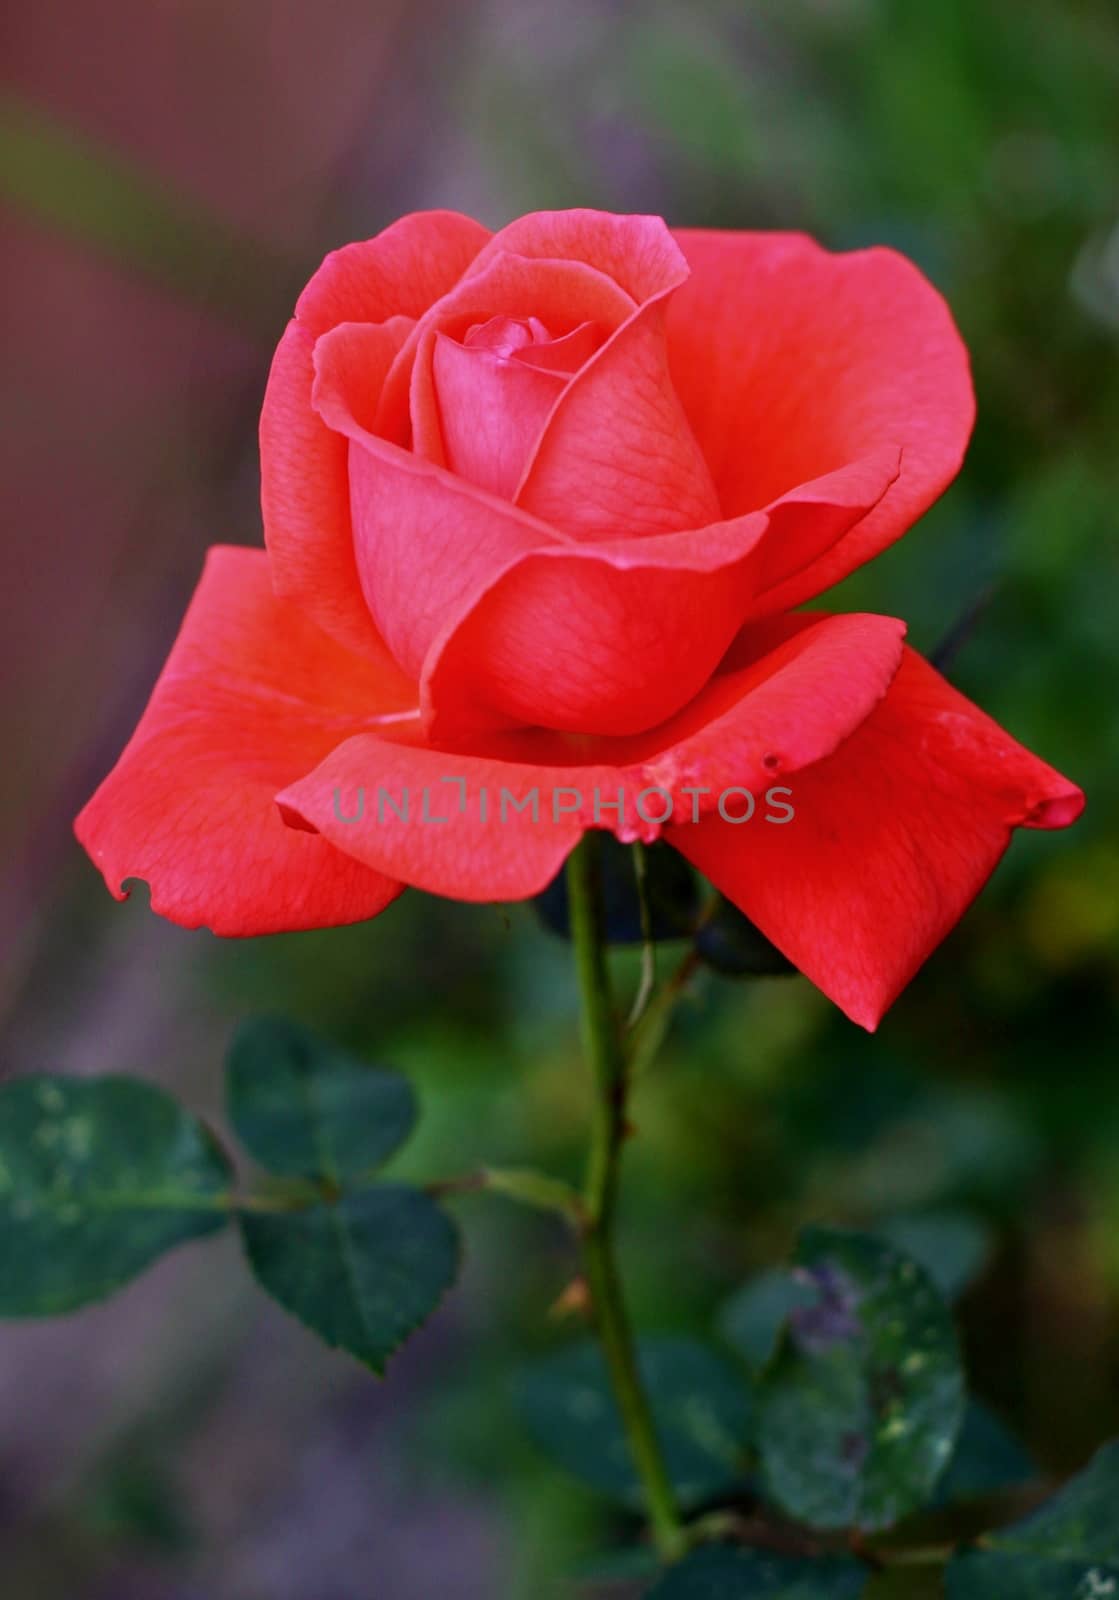 Beautiful rose and green leaves on the background